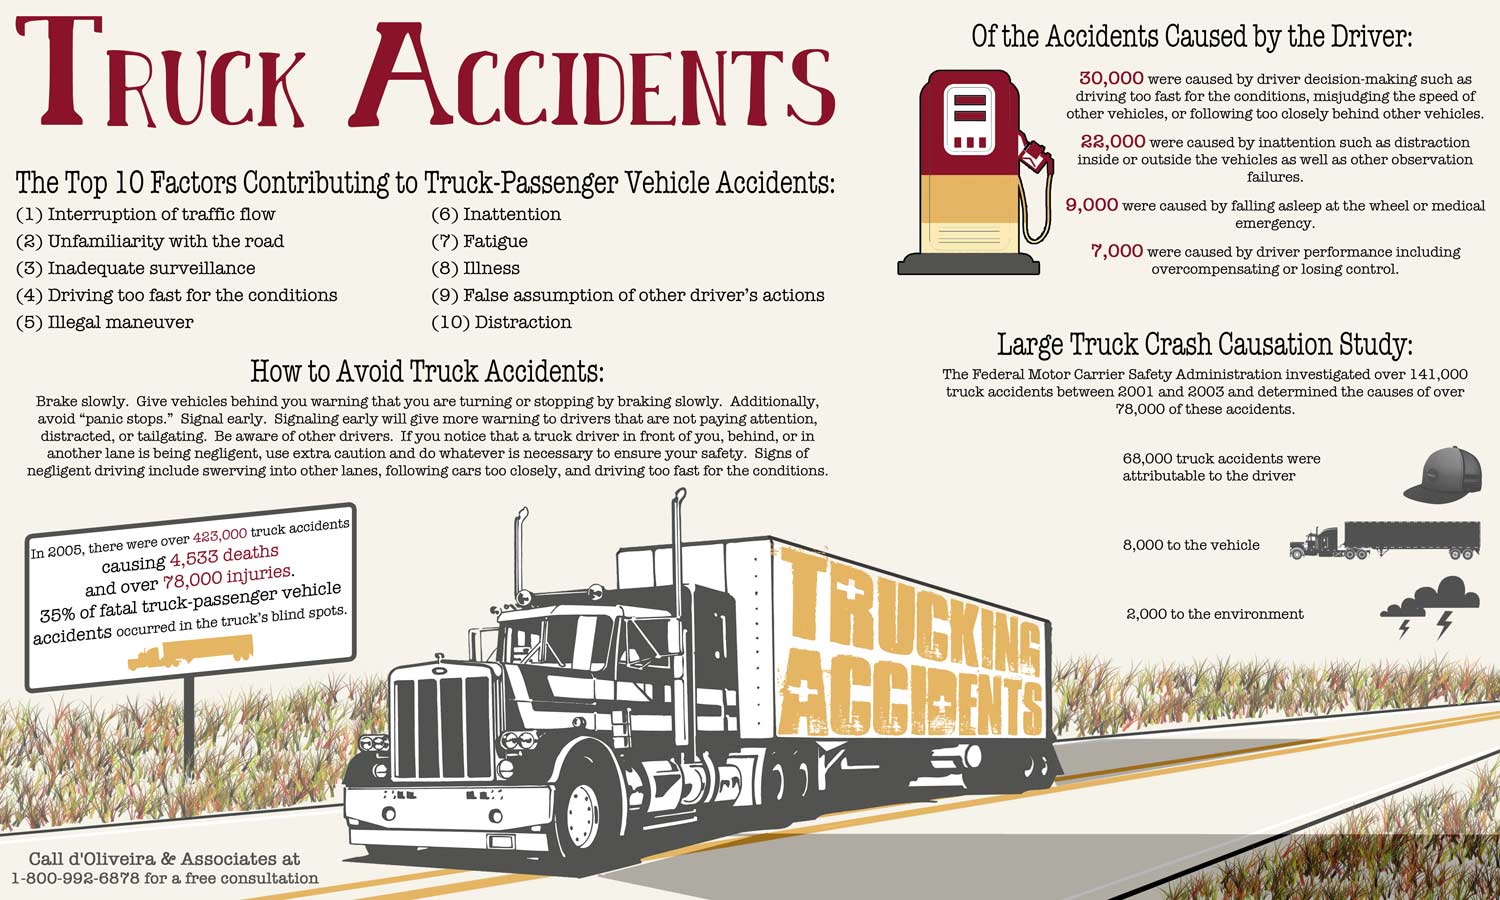 Trucking Accidents and Factors Contributing to Vehicle Accidents Infographic